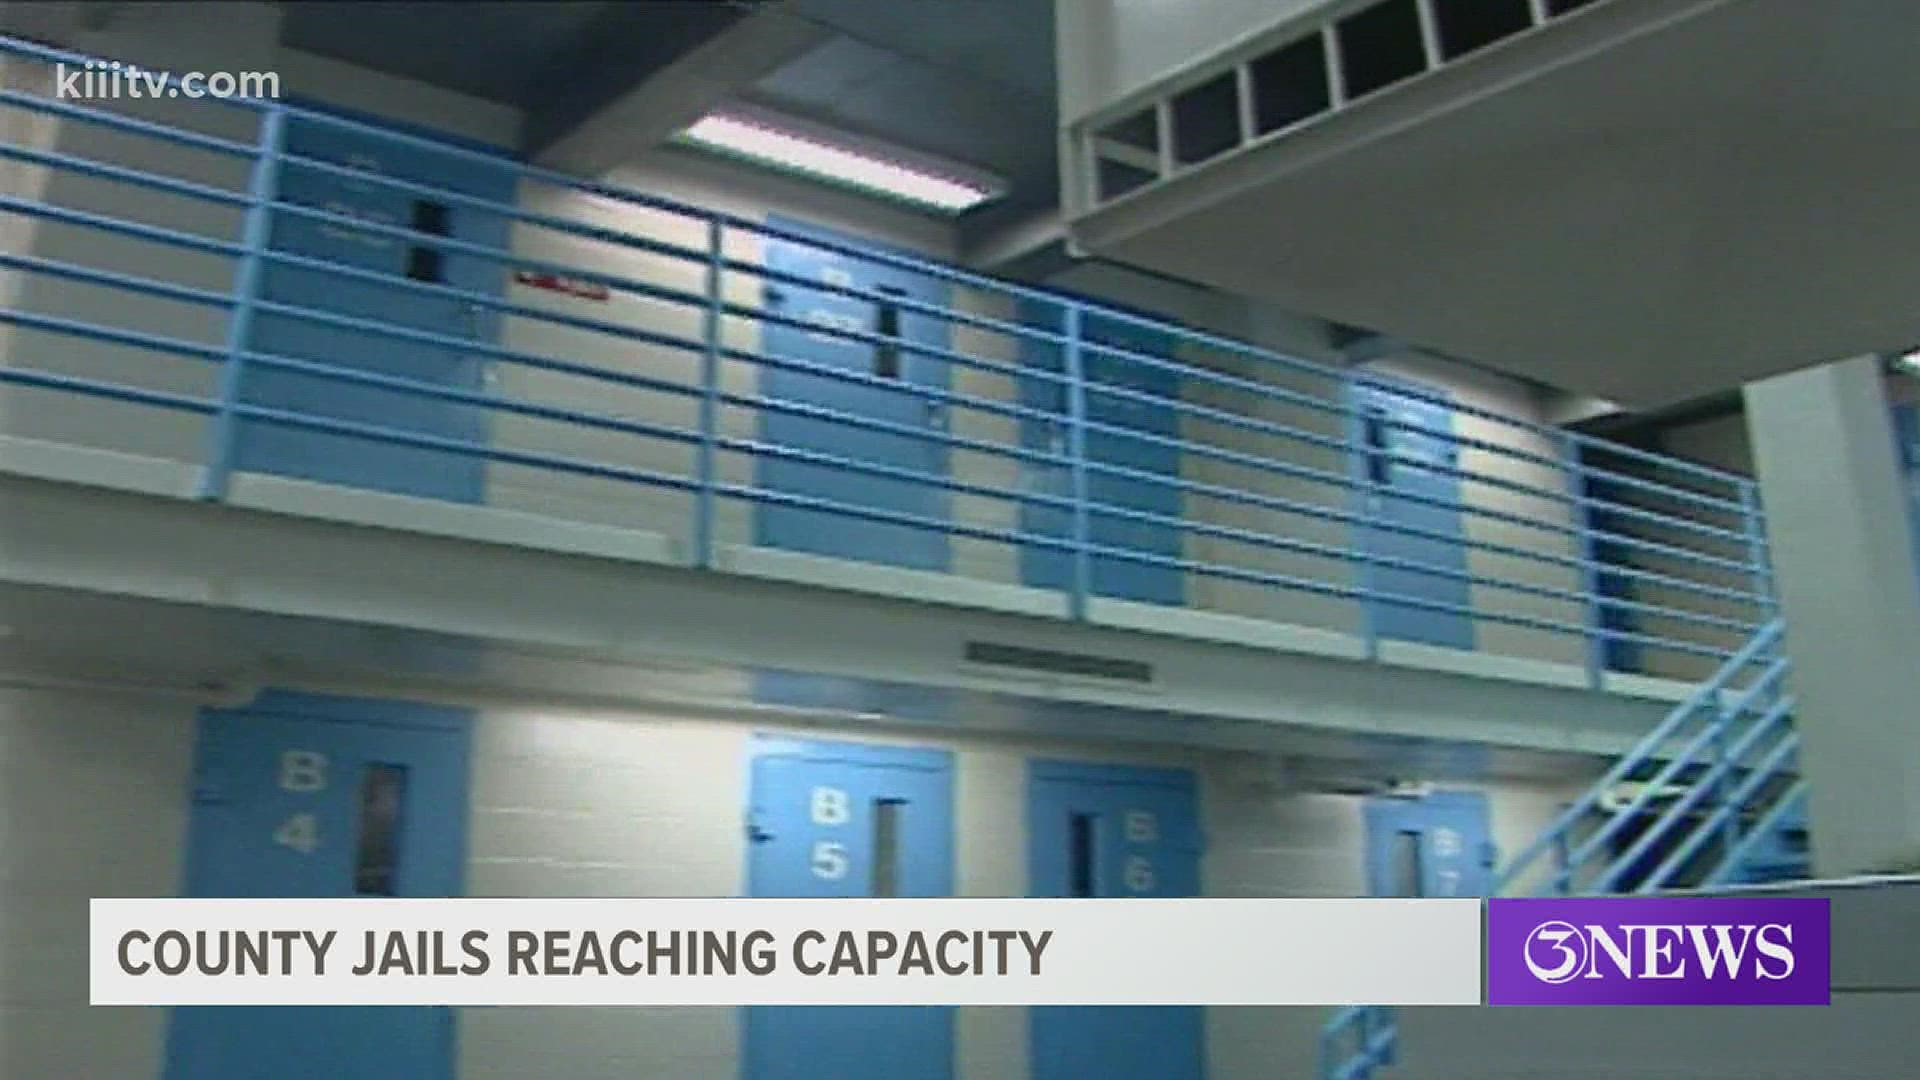 Both Counties admit that they've had problems finding spaces for inmates to reside.